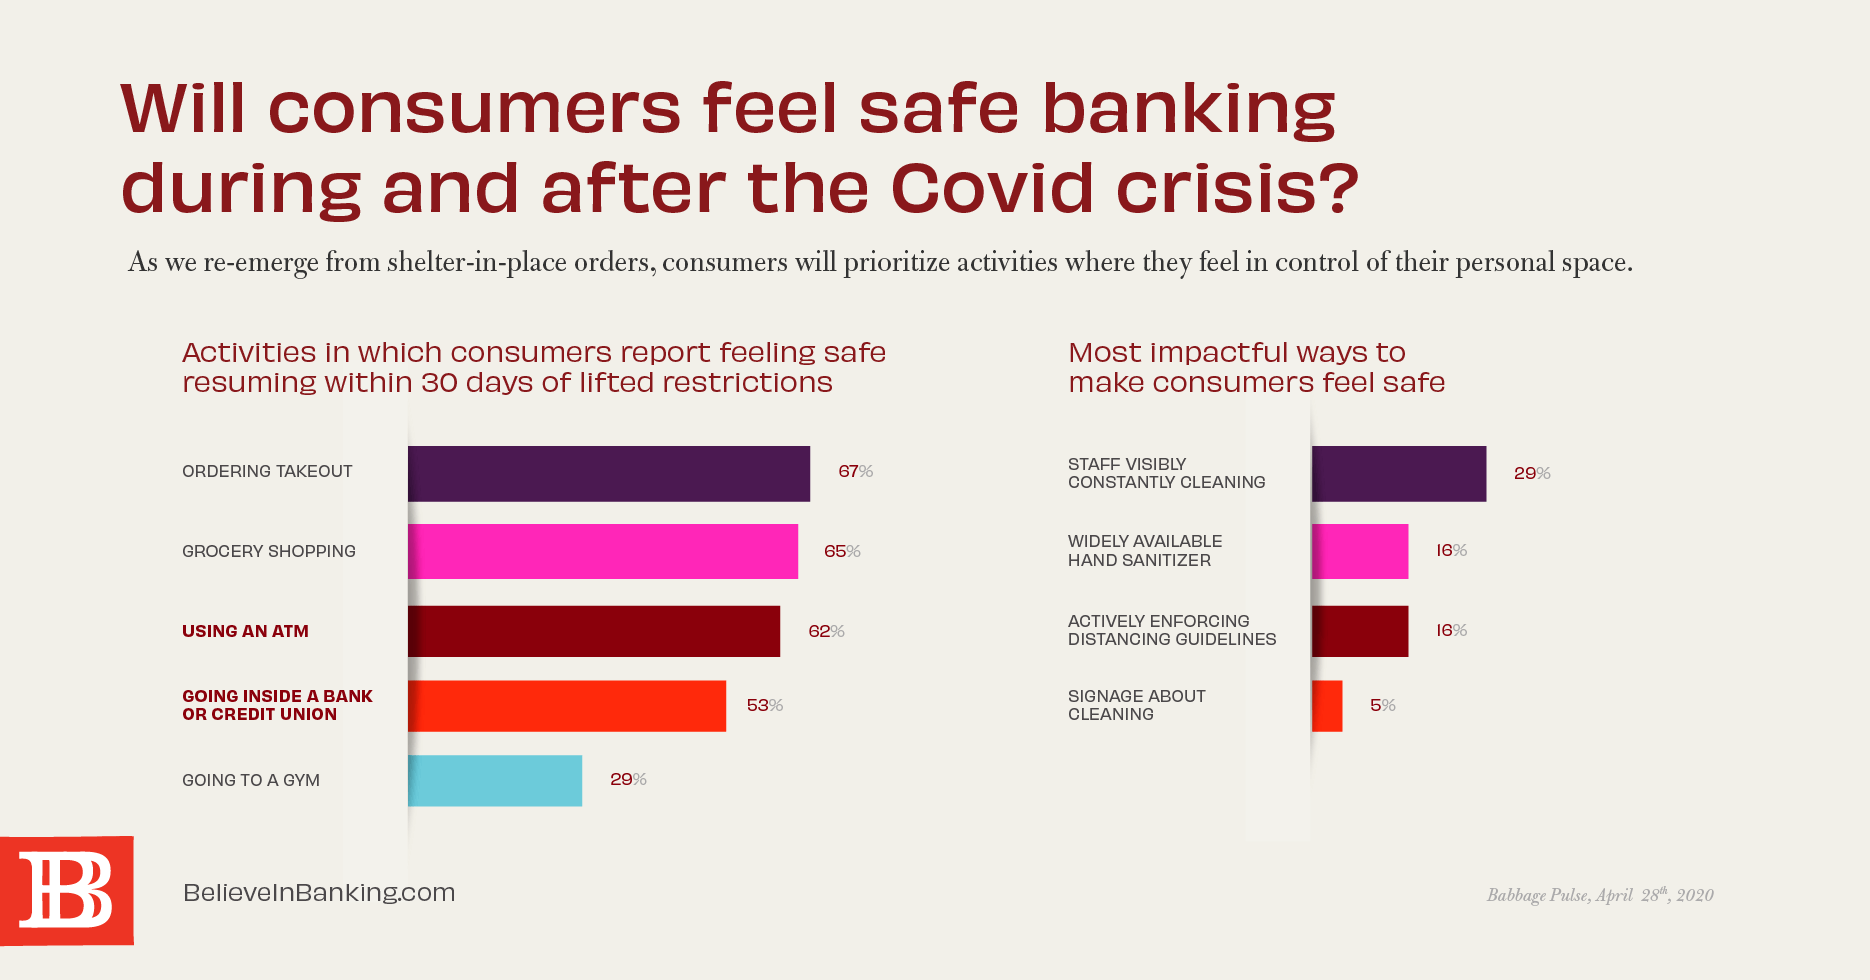 Statistics on consumers feeling safe banking after COVID